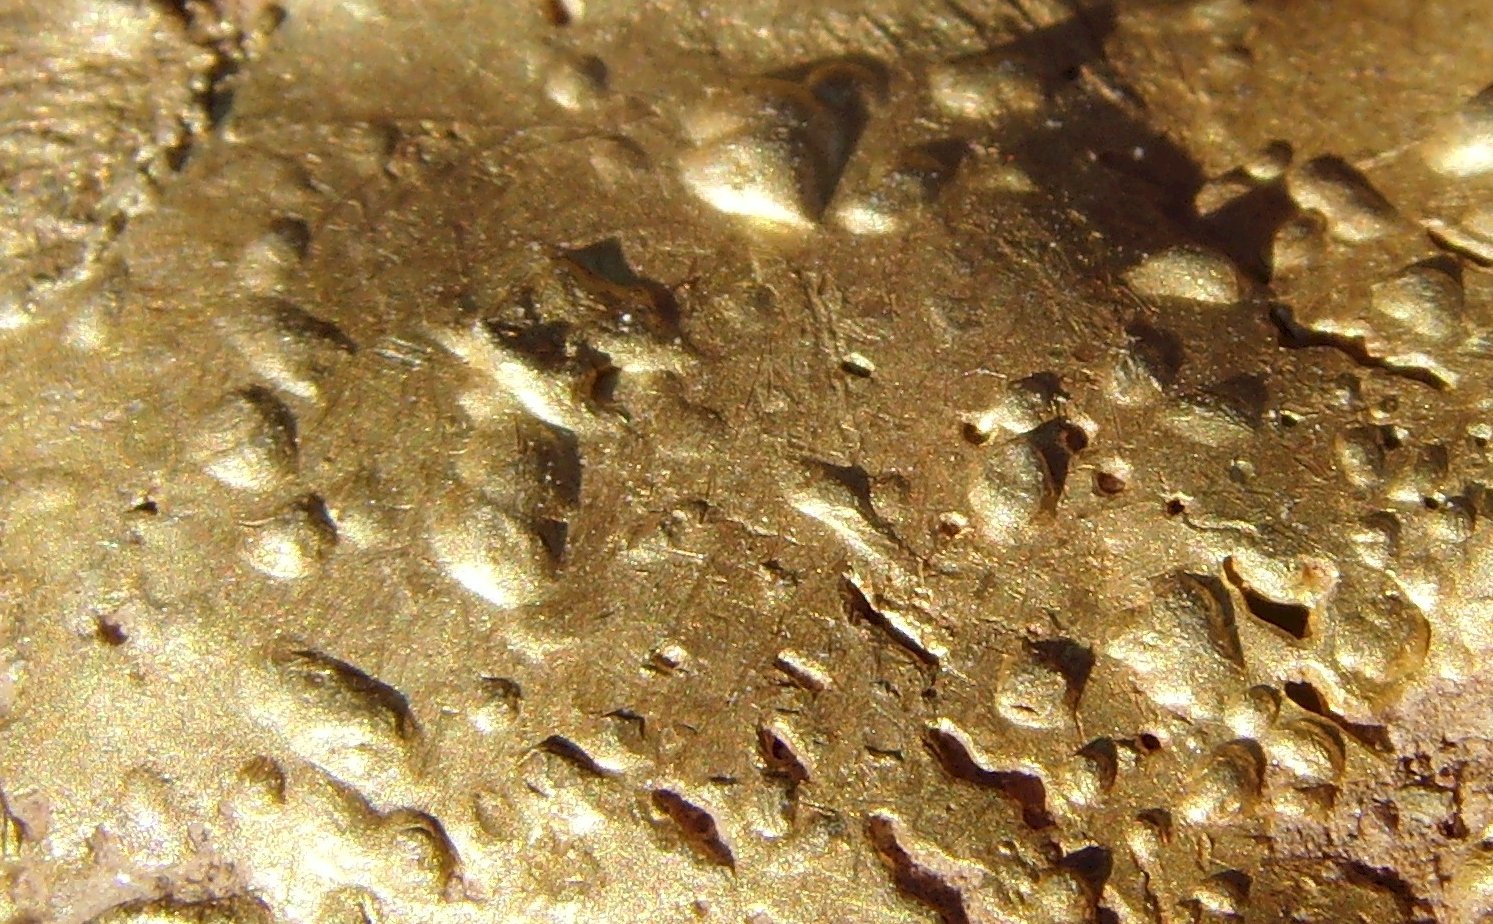 a close up of some rain drops on the side of a yellow metal surface